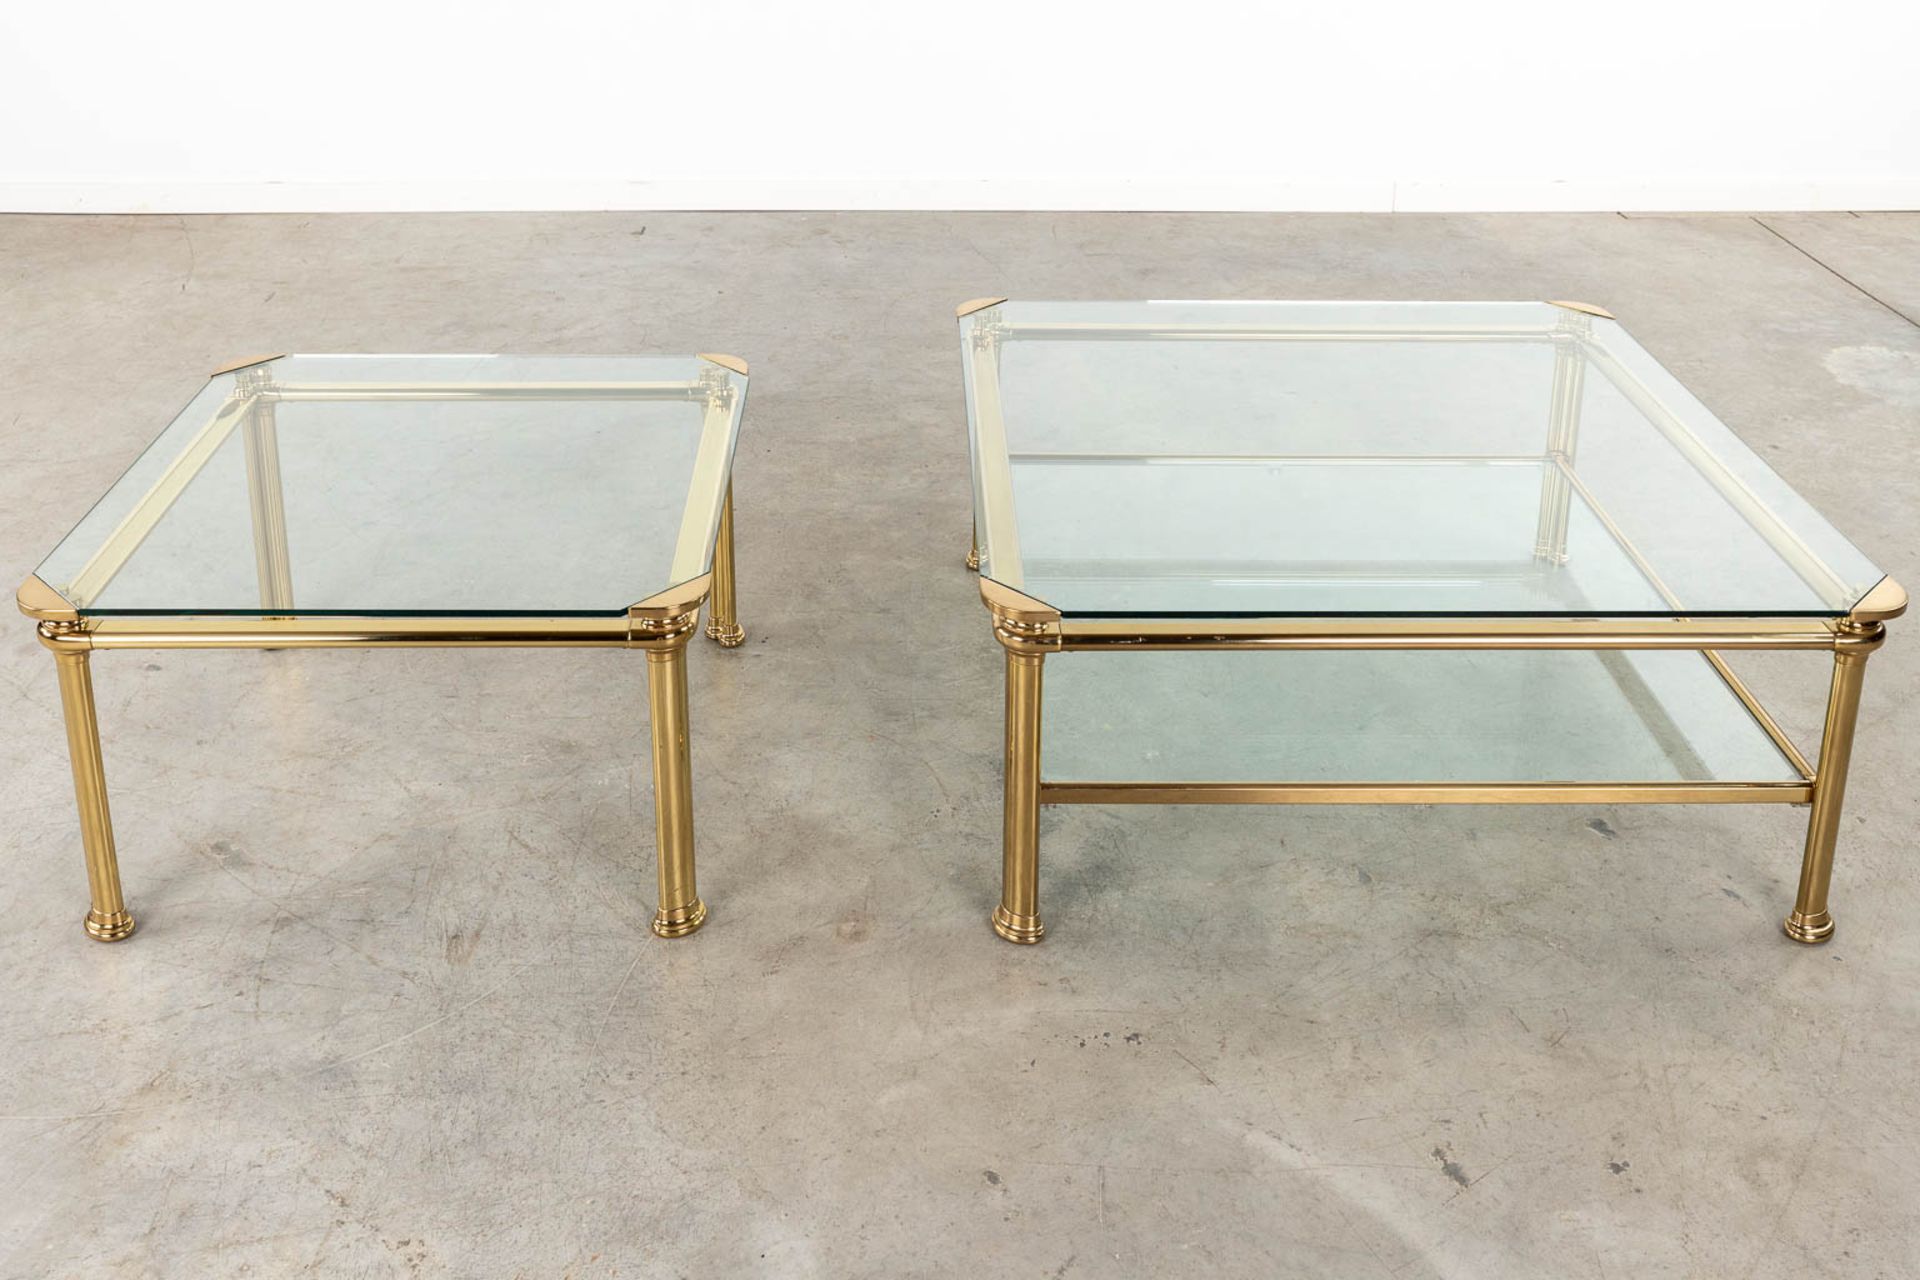 A large and small coffee table, brass and glass. Signed Mara. Circa 1980. (D:90 x W:90 x H:38 cm) - Image 3 of 6